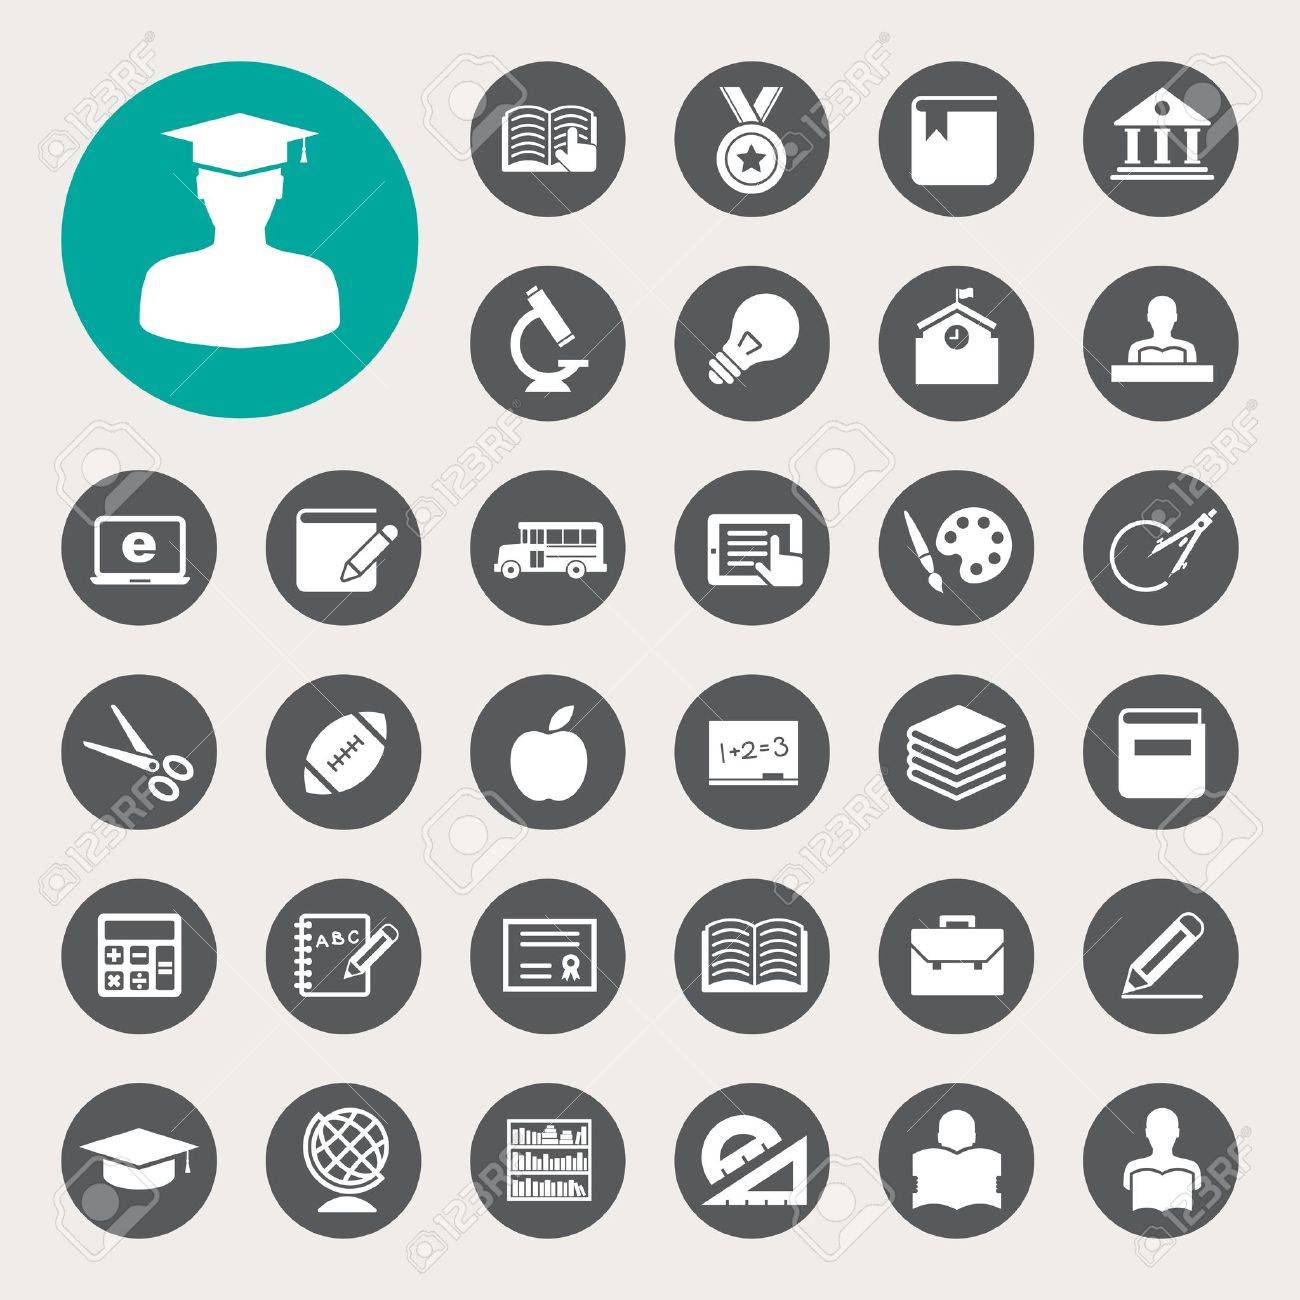 Online education Icons - 222 free vector icons